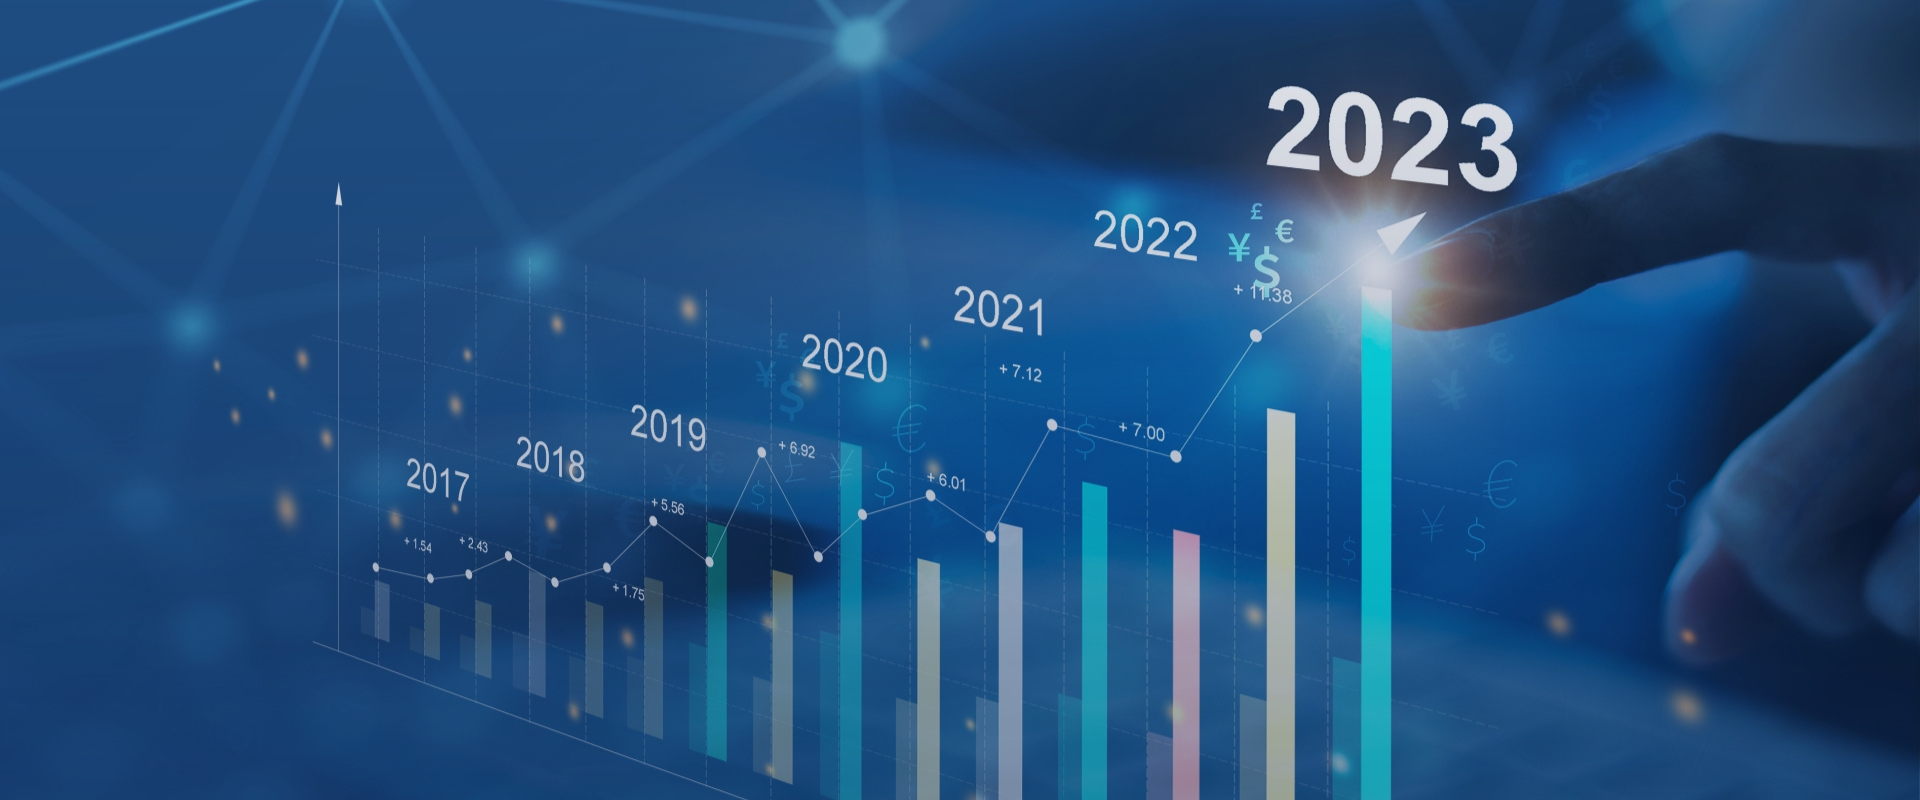 Marketing Trends You Should Watch in 2023